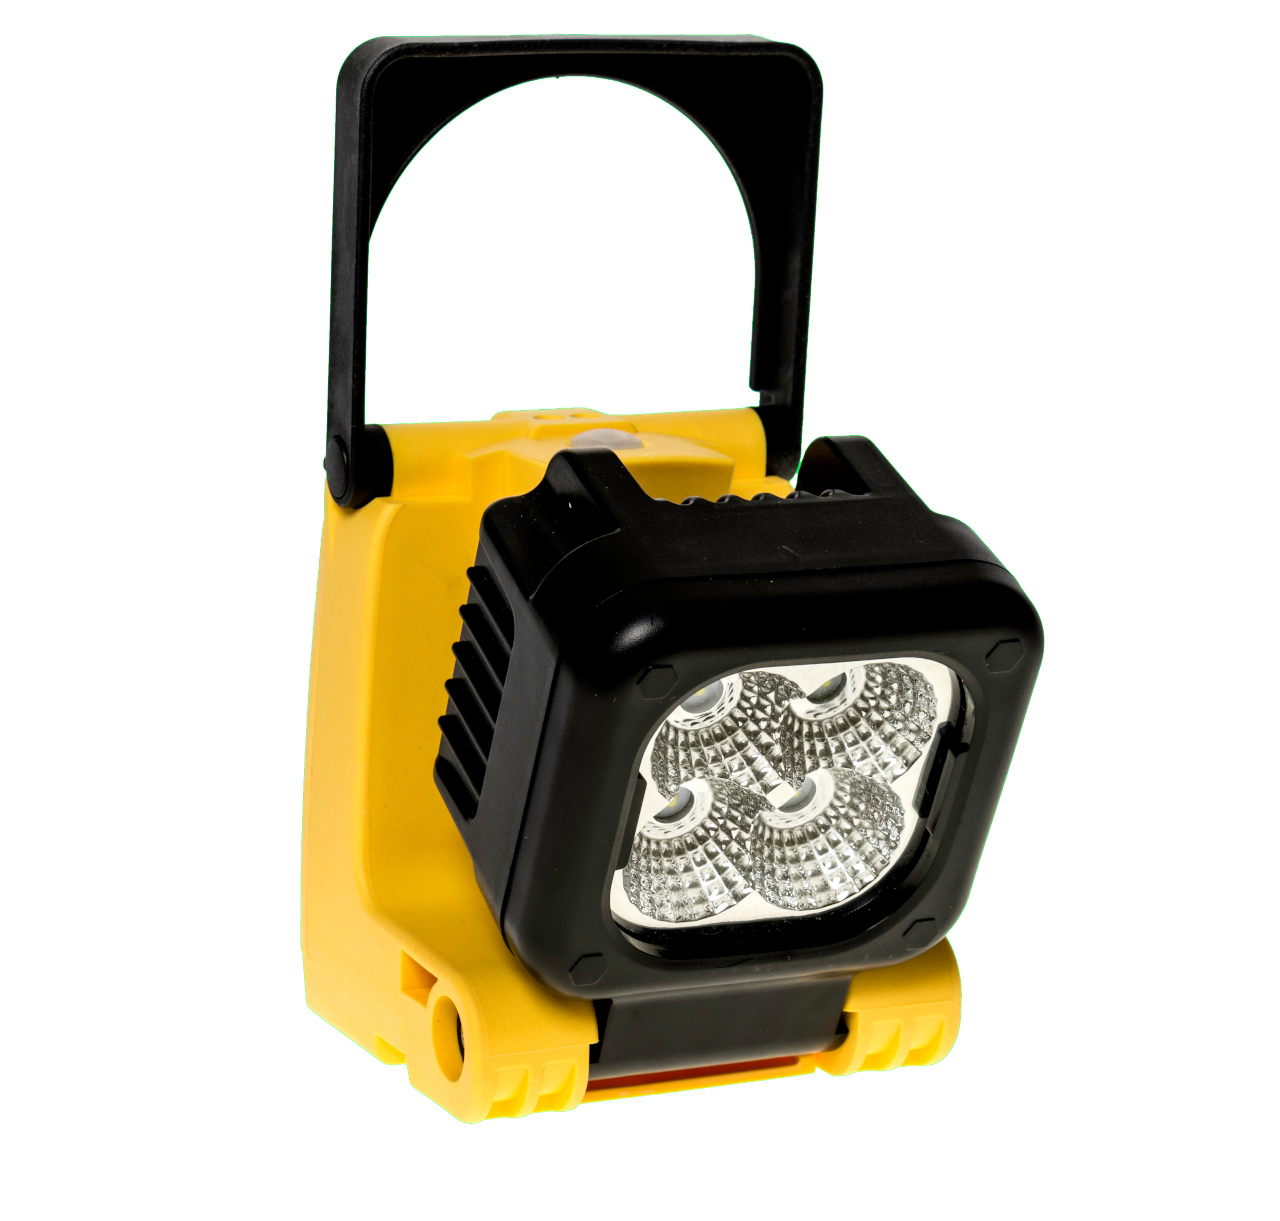 Chuck-Lamp Portable Rechargeable Work light